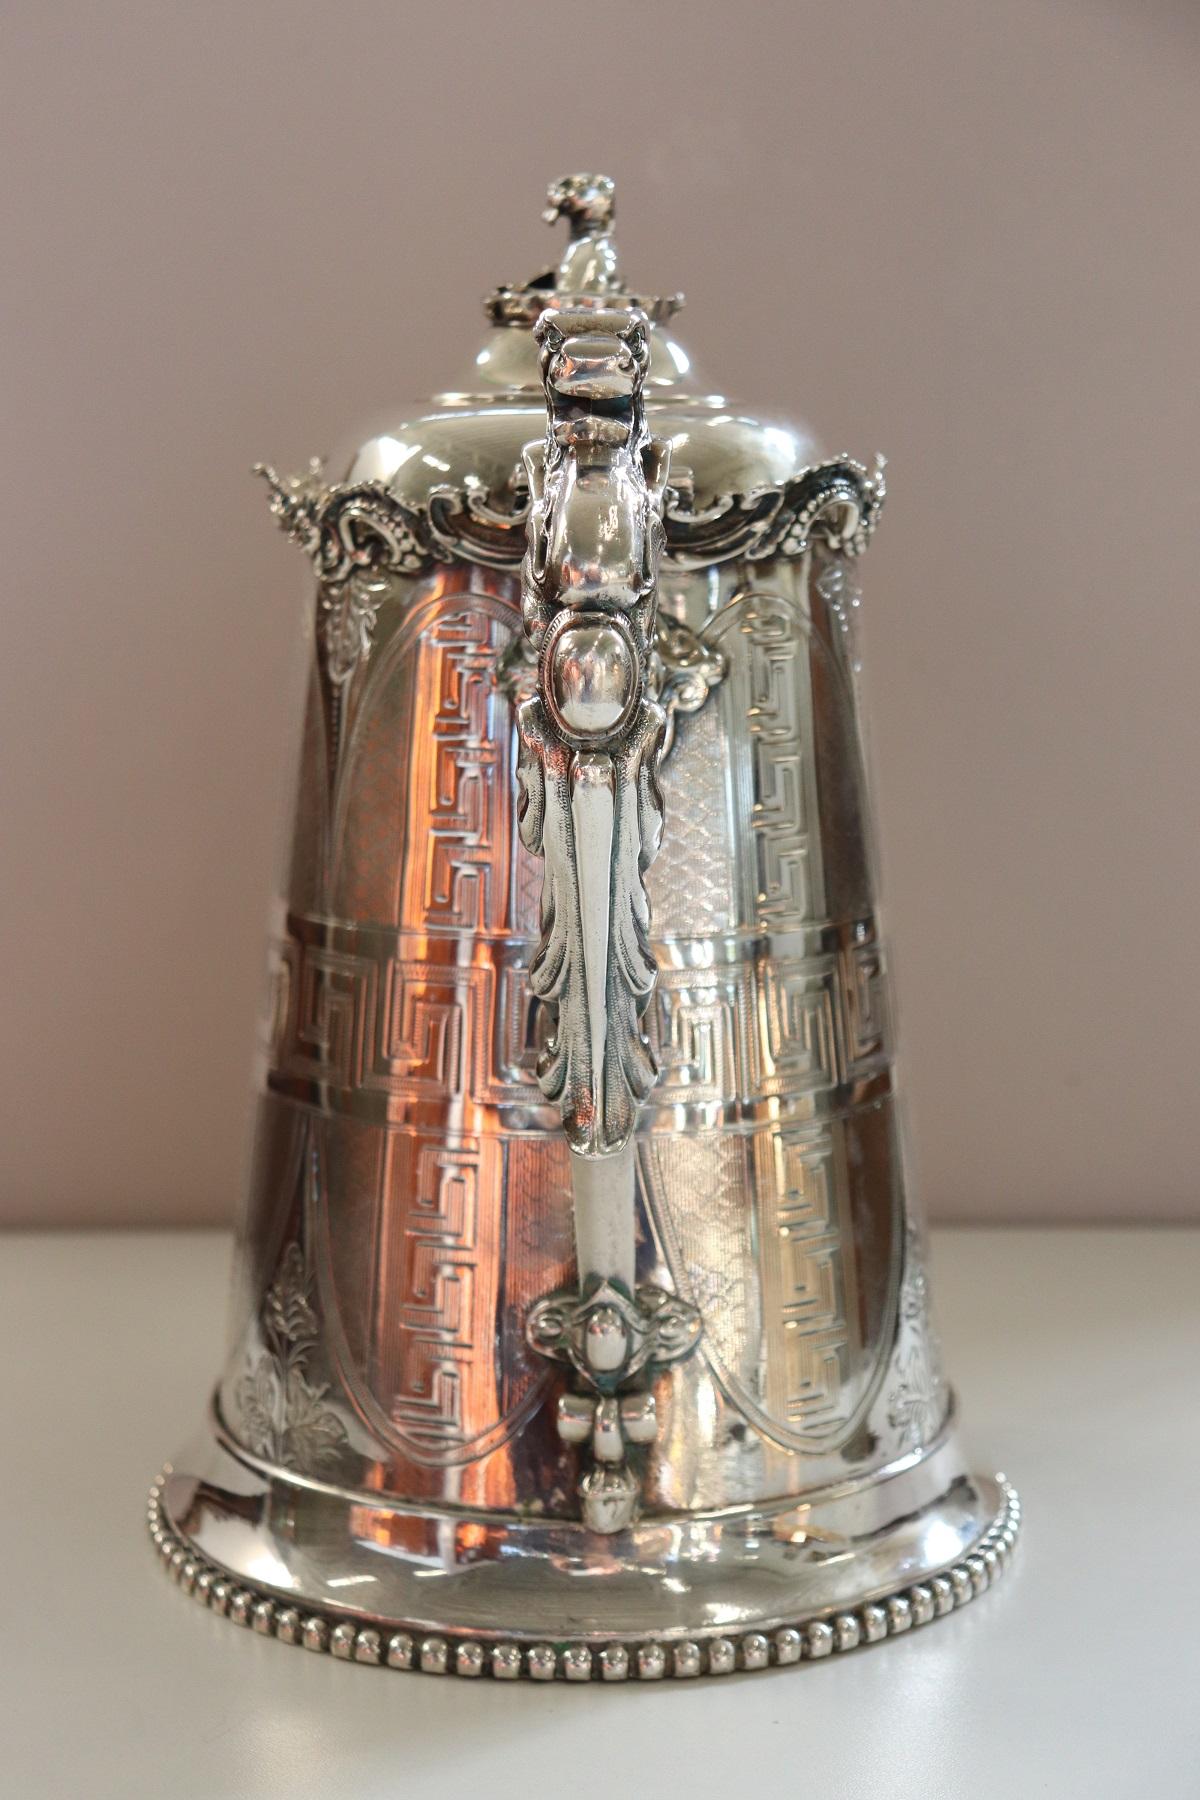 Beautiful american antique silver plate pitcher by Ernest Kaufman. Great chiseling work in the metal look carefully at the refined decoration. On front engraved 